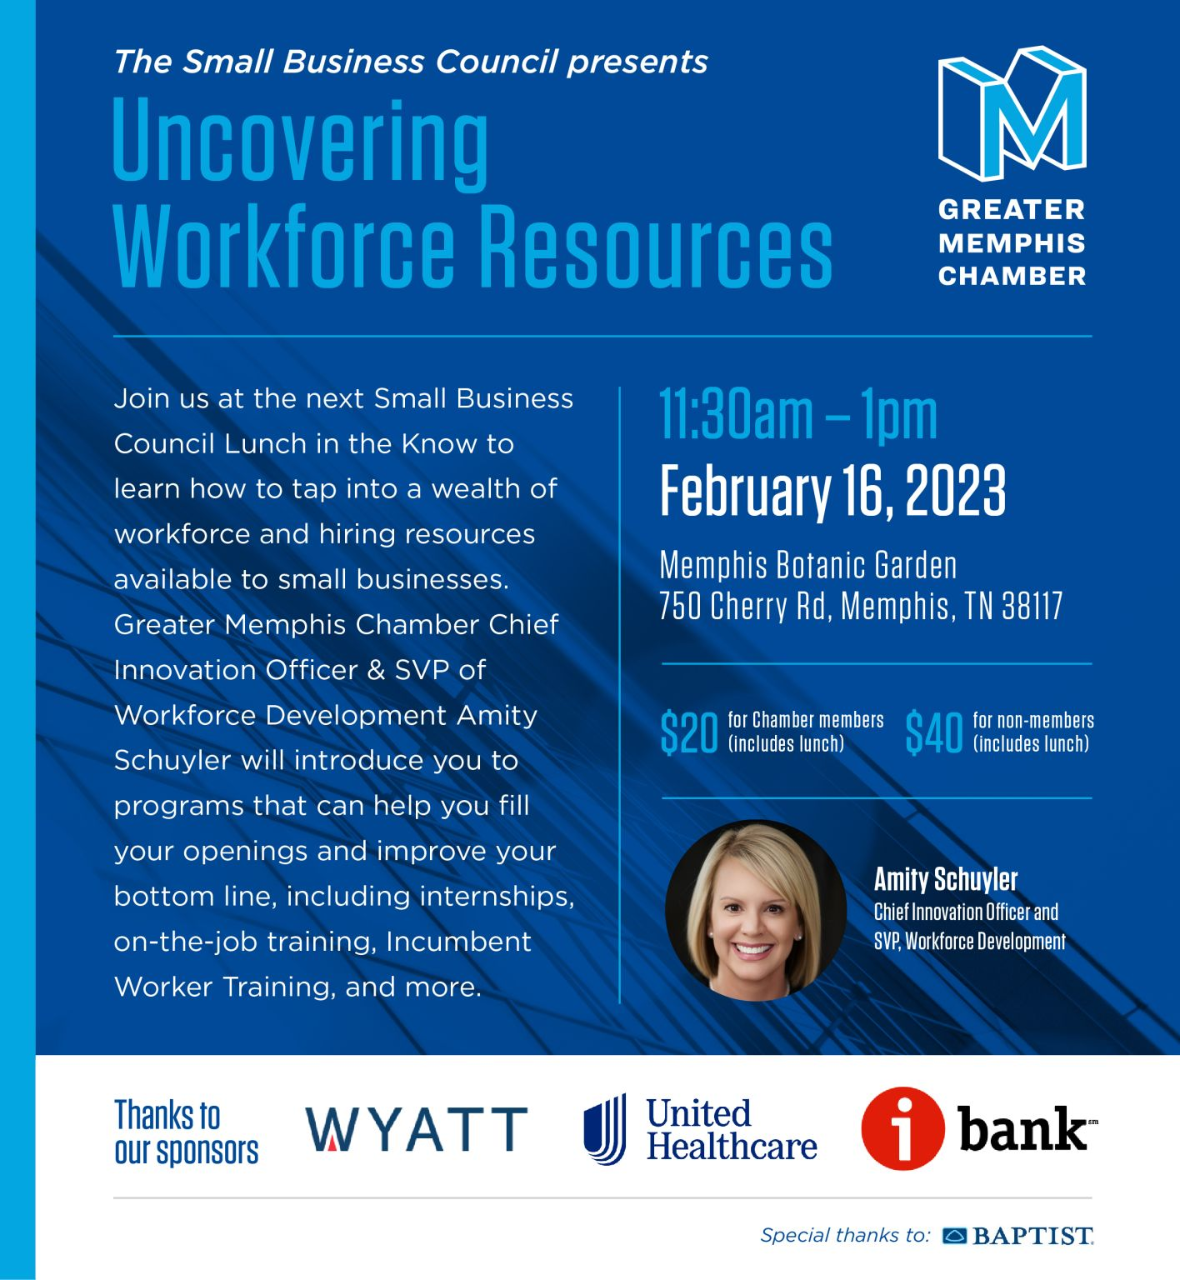 Uncovering Workforce Resources